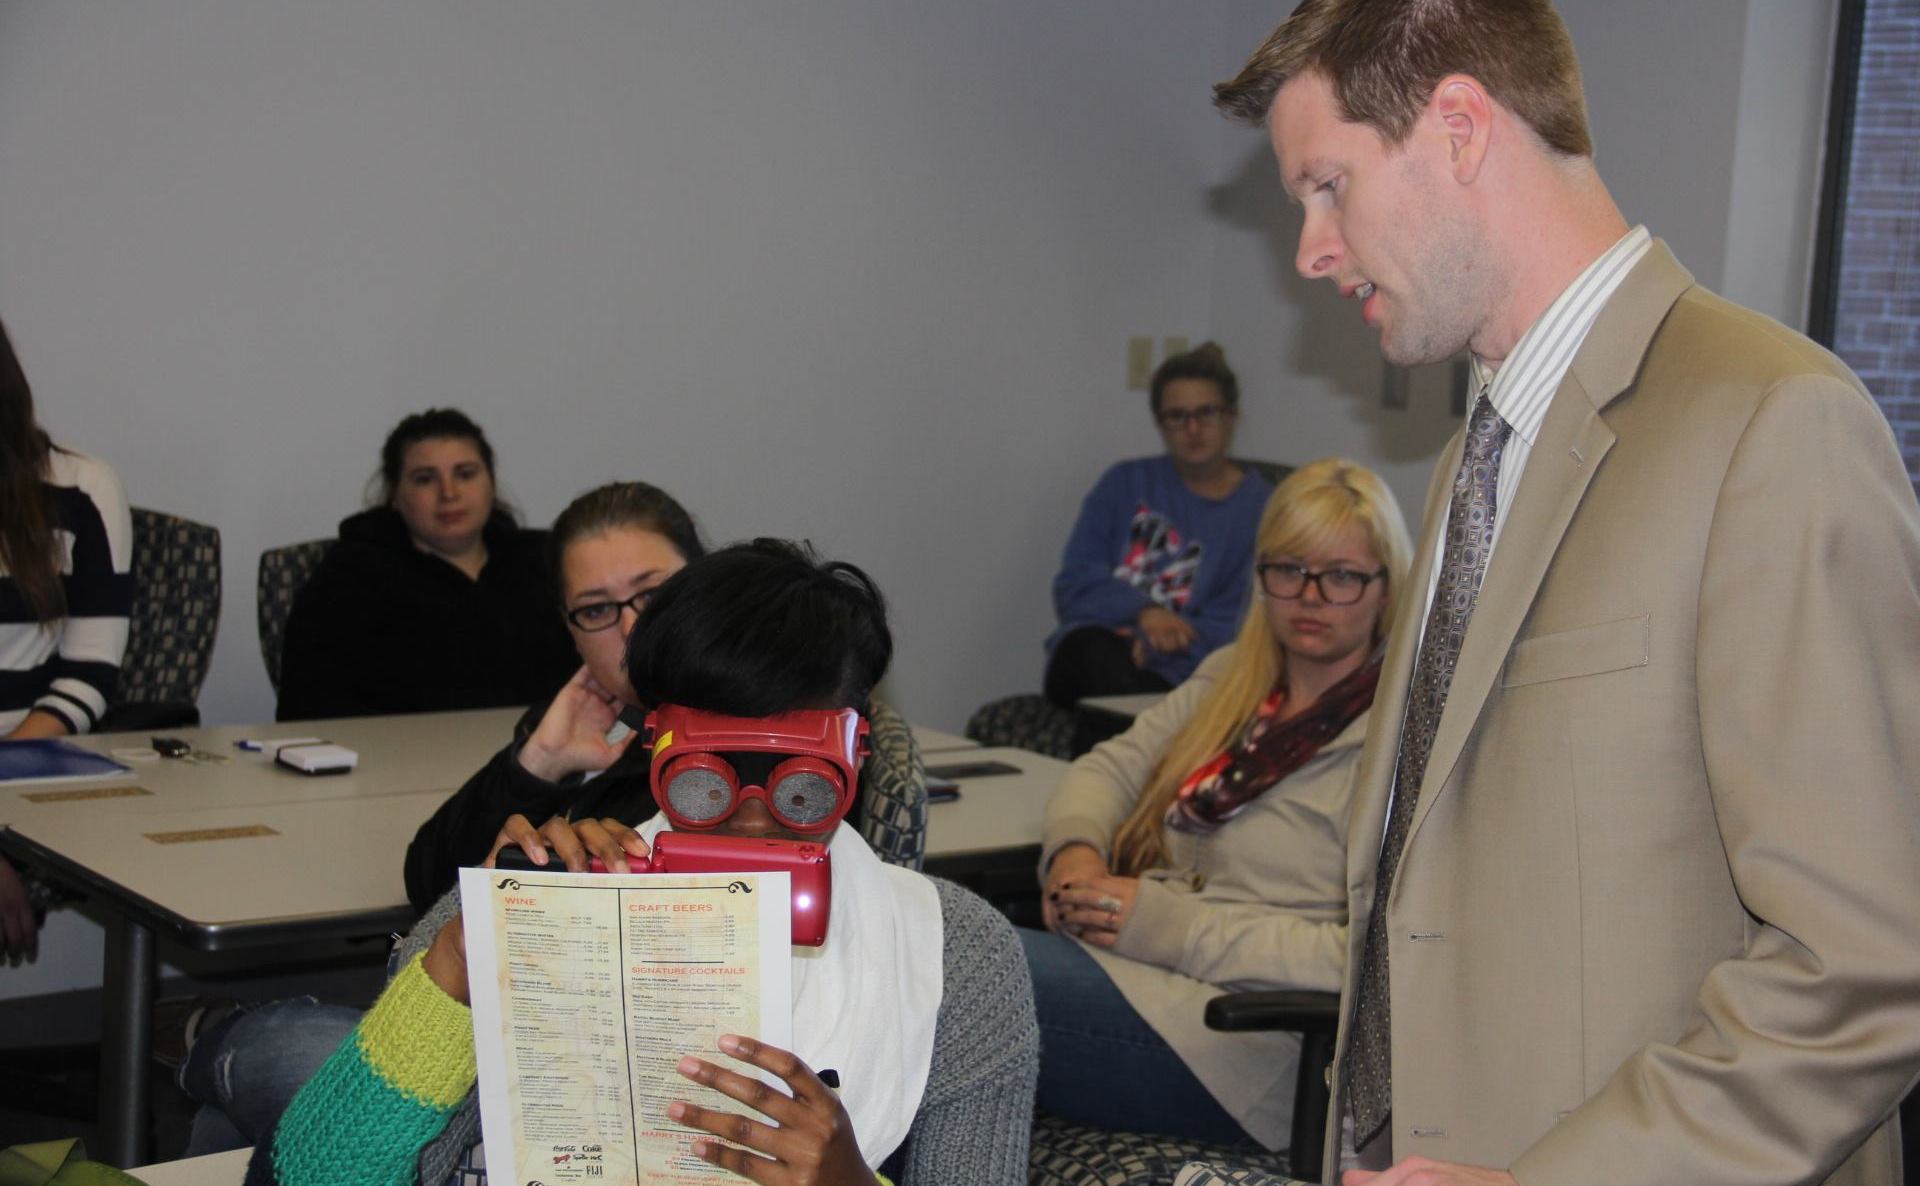 See Different attendee using vision simulator glasses and a hand held magnifying aid.